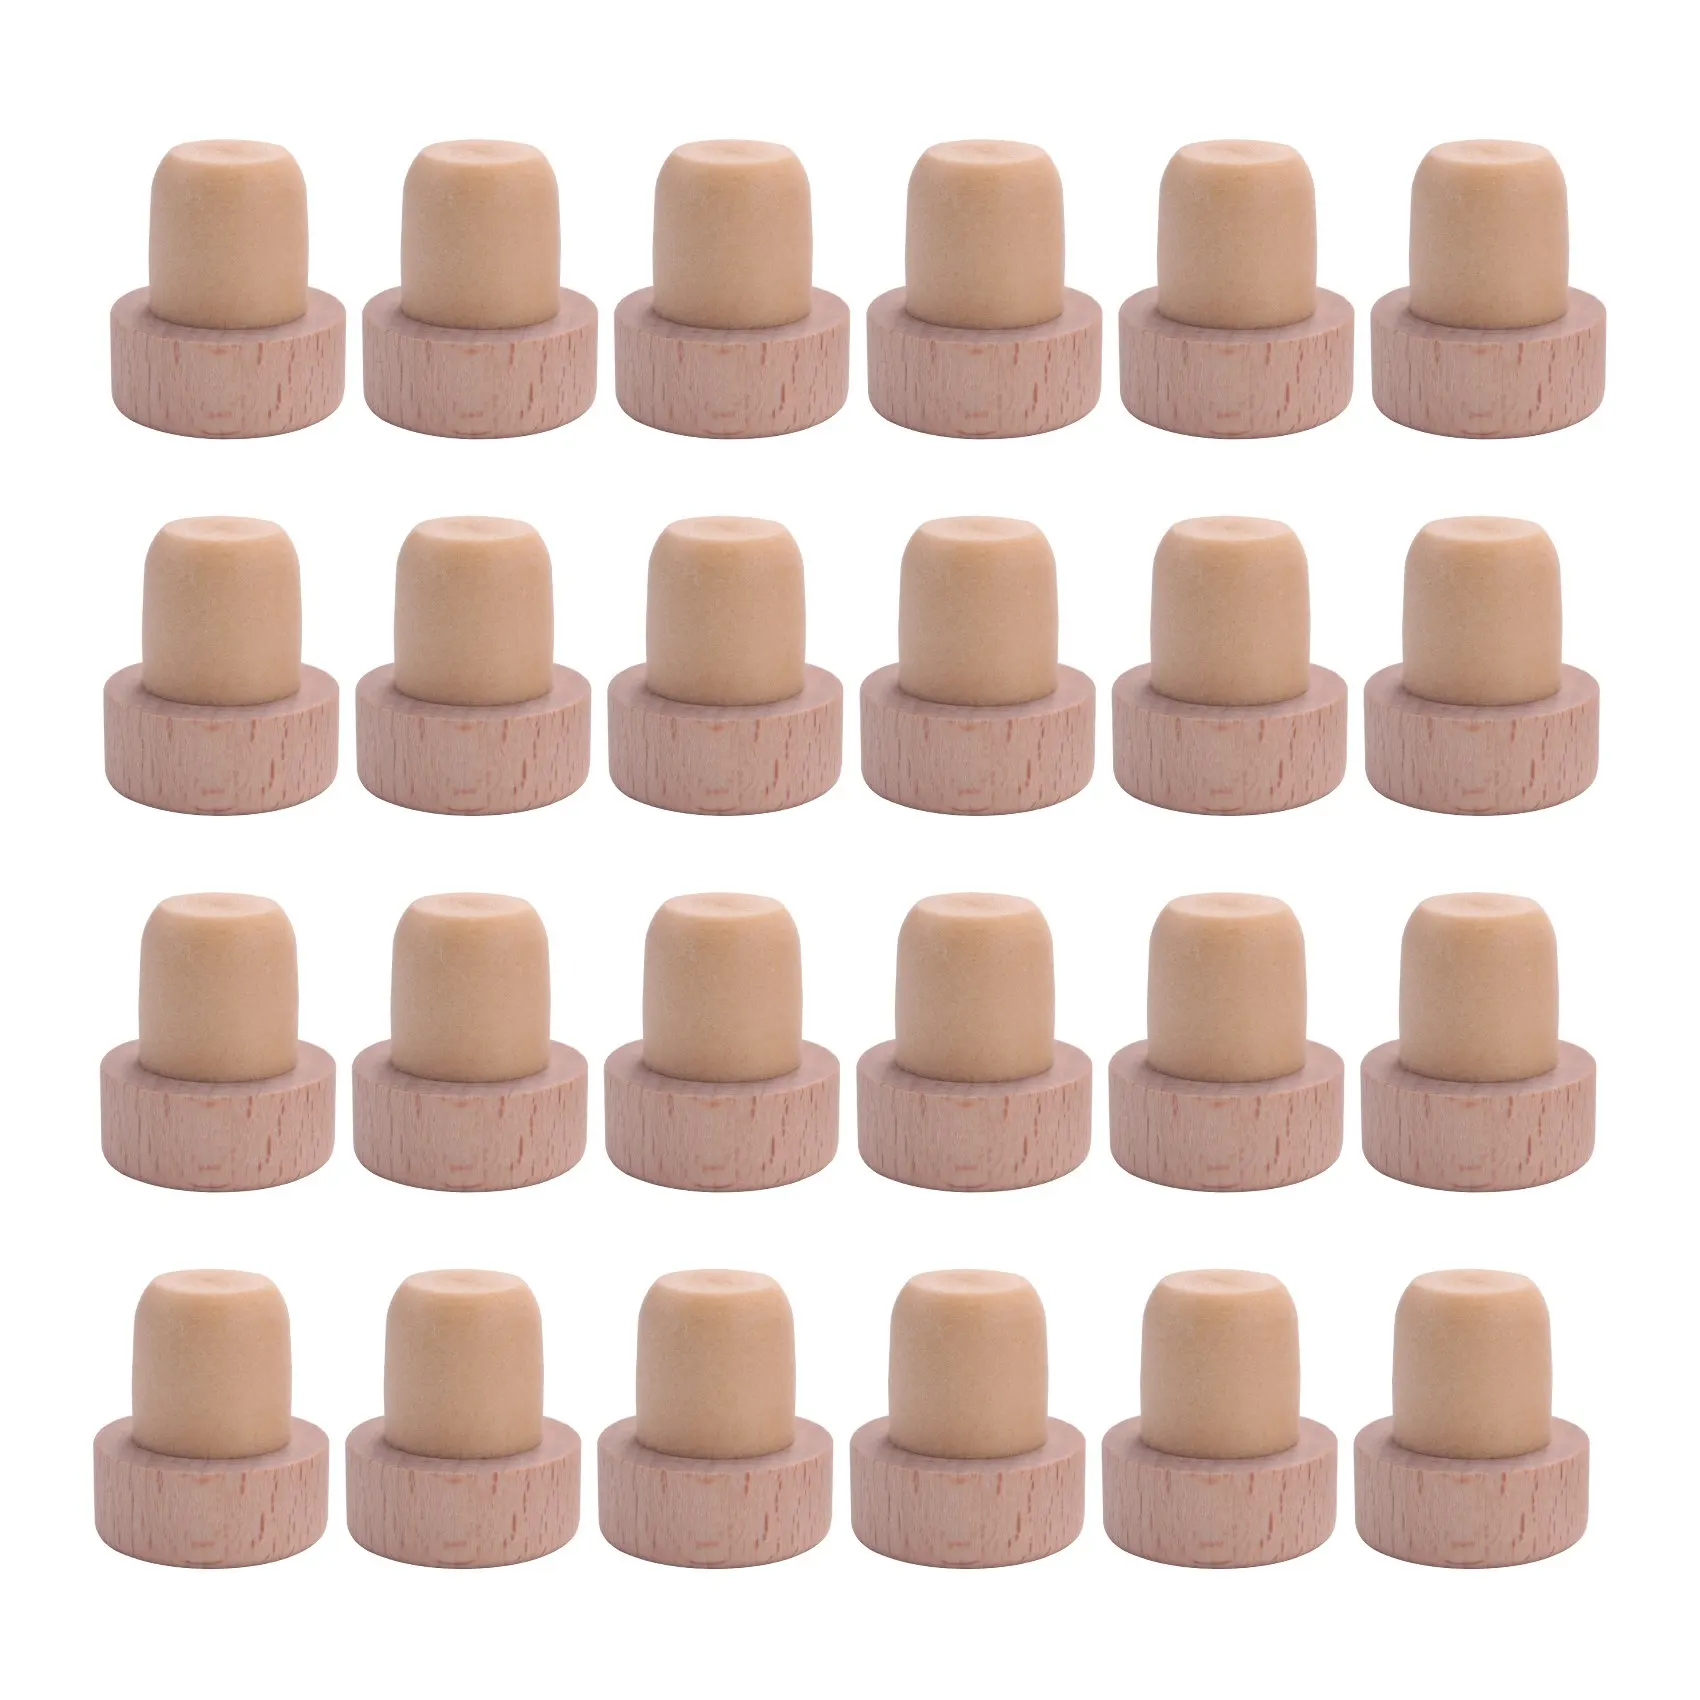 

24Pc Wine Bottle Corks T Shaped Cork Plugs for Wine Cork Wine Stopper Reusable Wine Corks Wooden and Rubber Wine Stopper